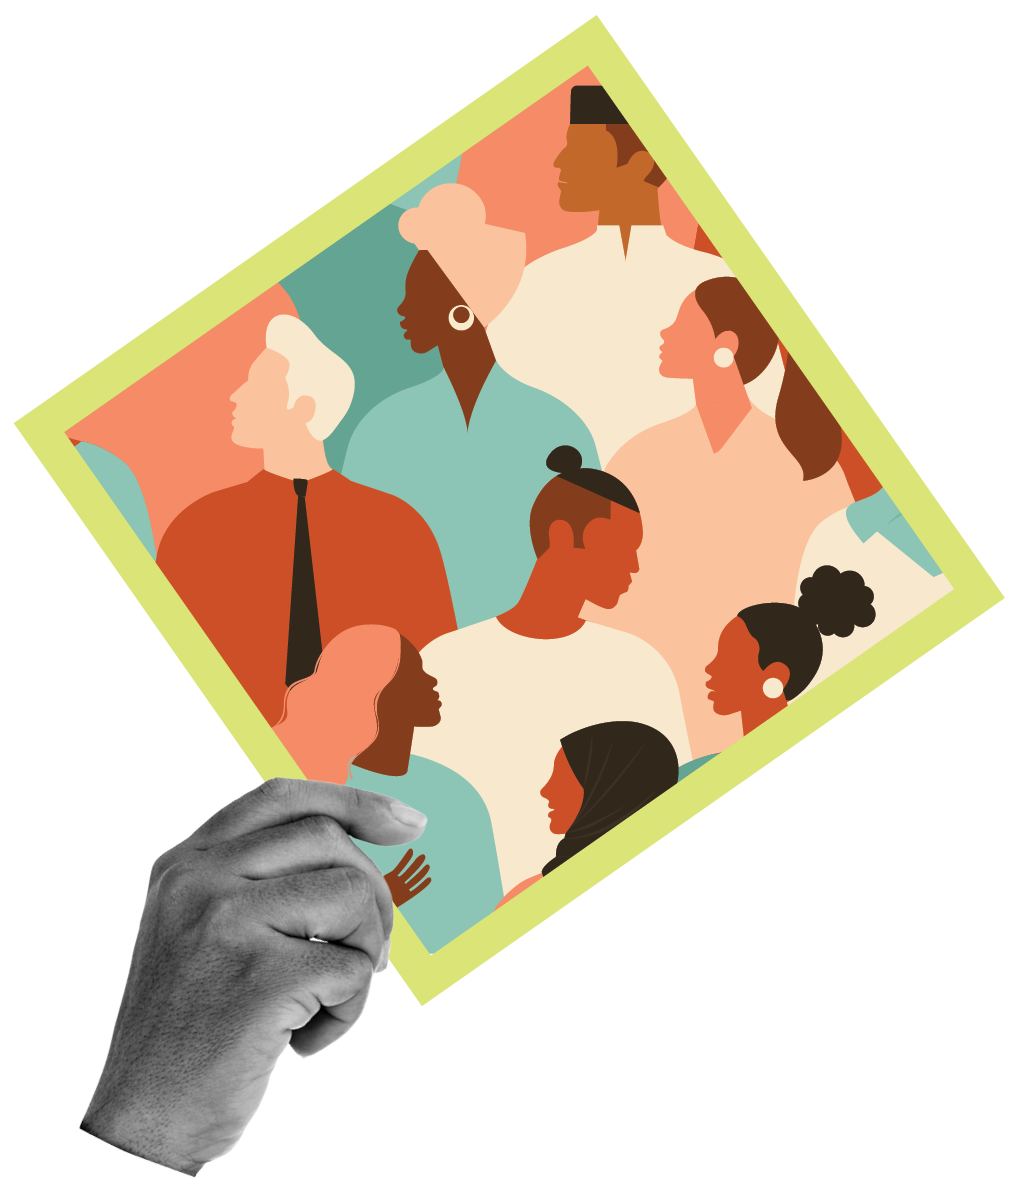 One of the hands from the cover of the report holding a square. Inside the square is an illustration of people of various diversities and genders.
